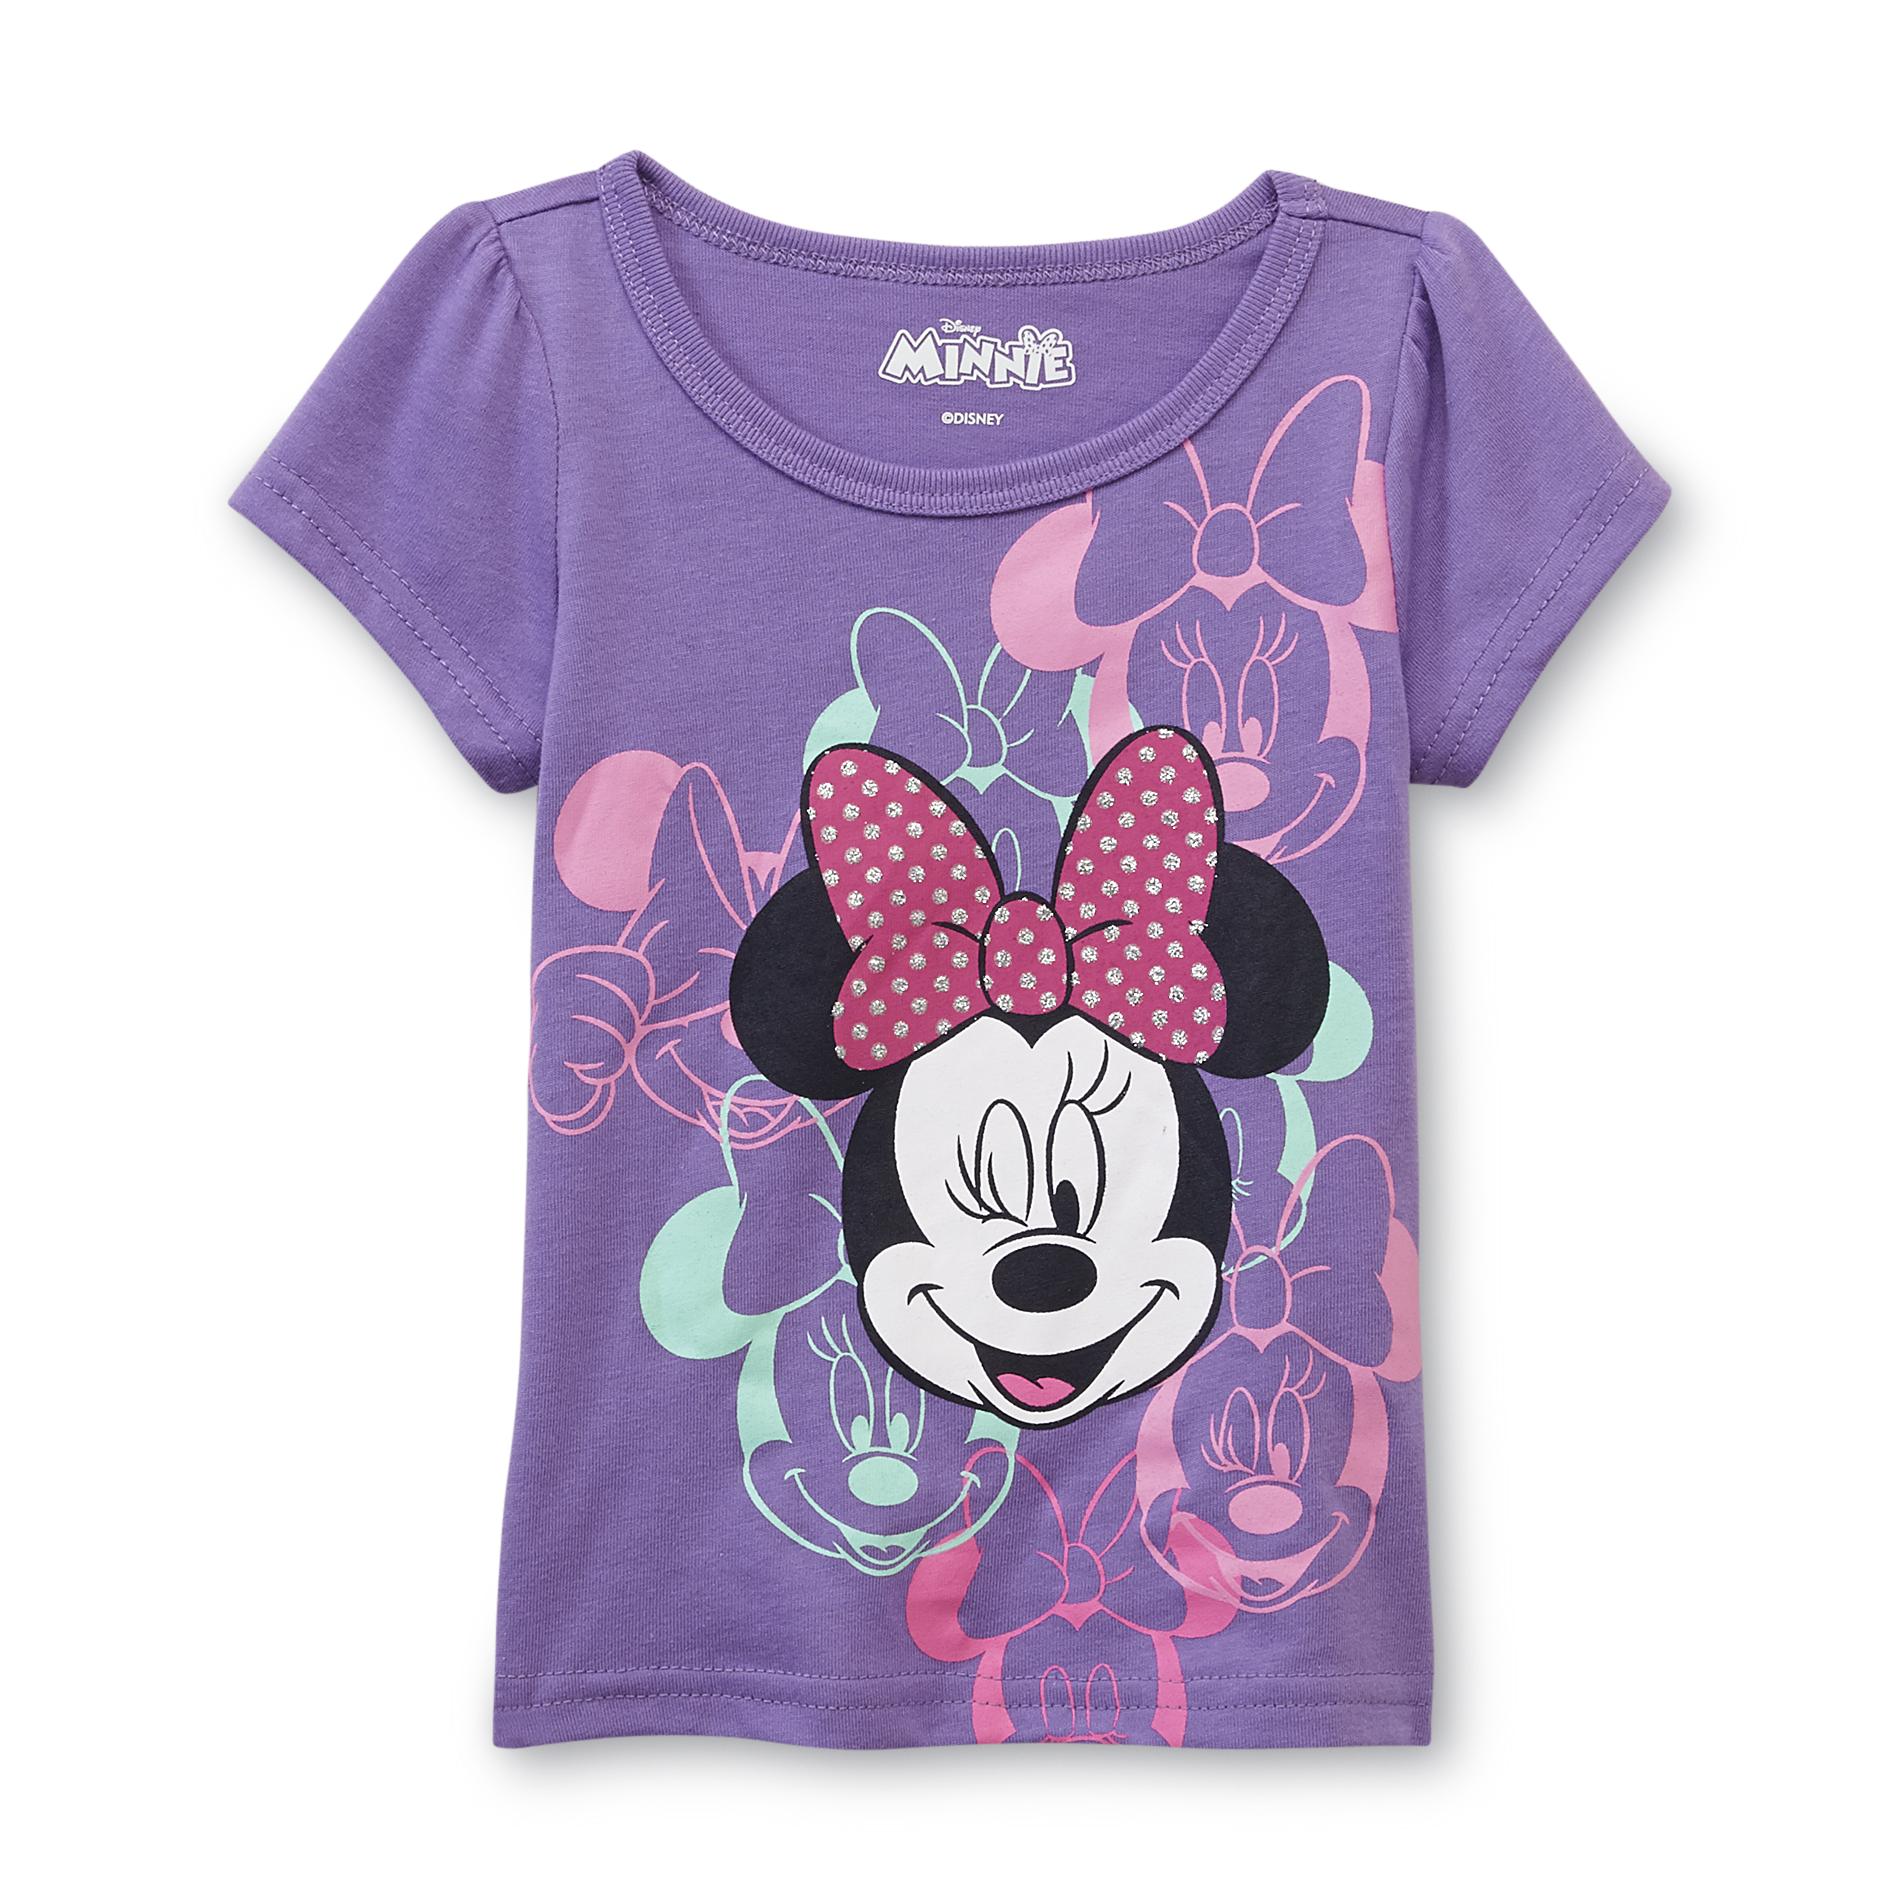 Disney Minnie Mouse Toddler Girl's Top